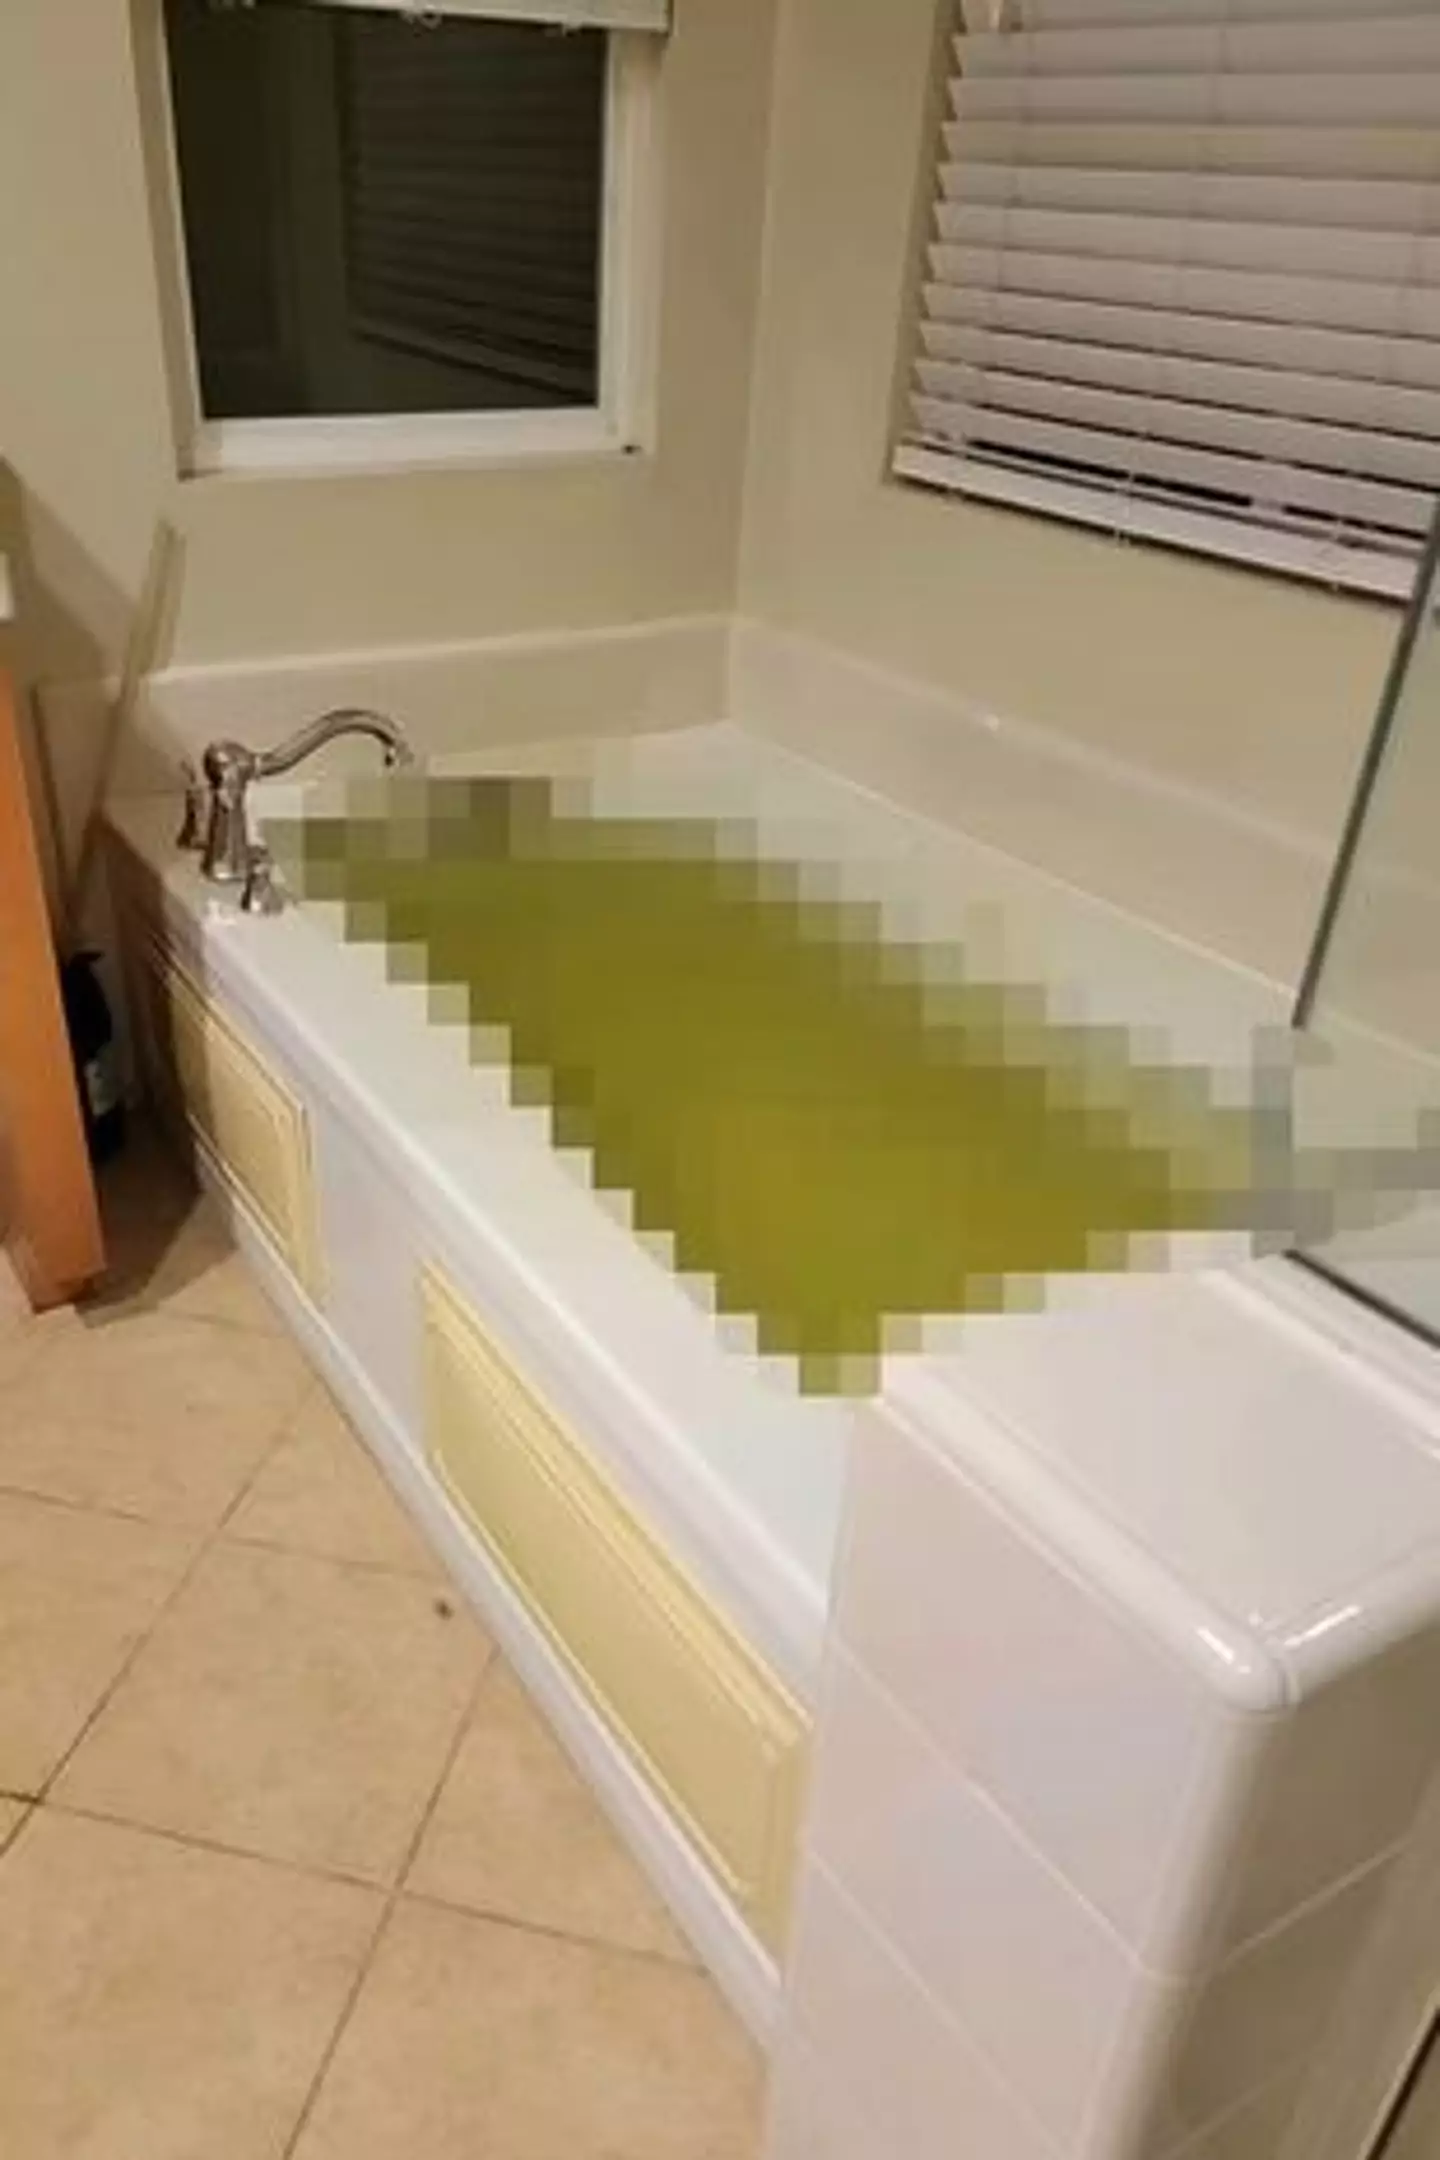 Jane Schneck shared a picture of the bathtub where Carter was found dead.